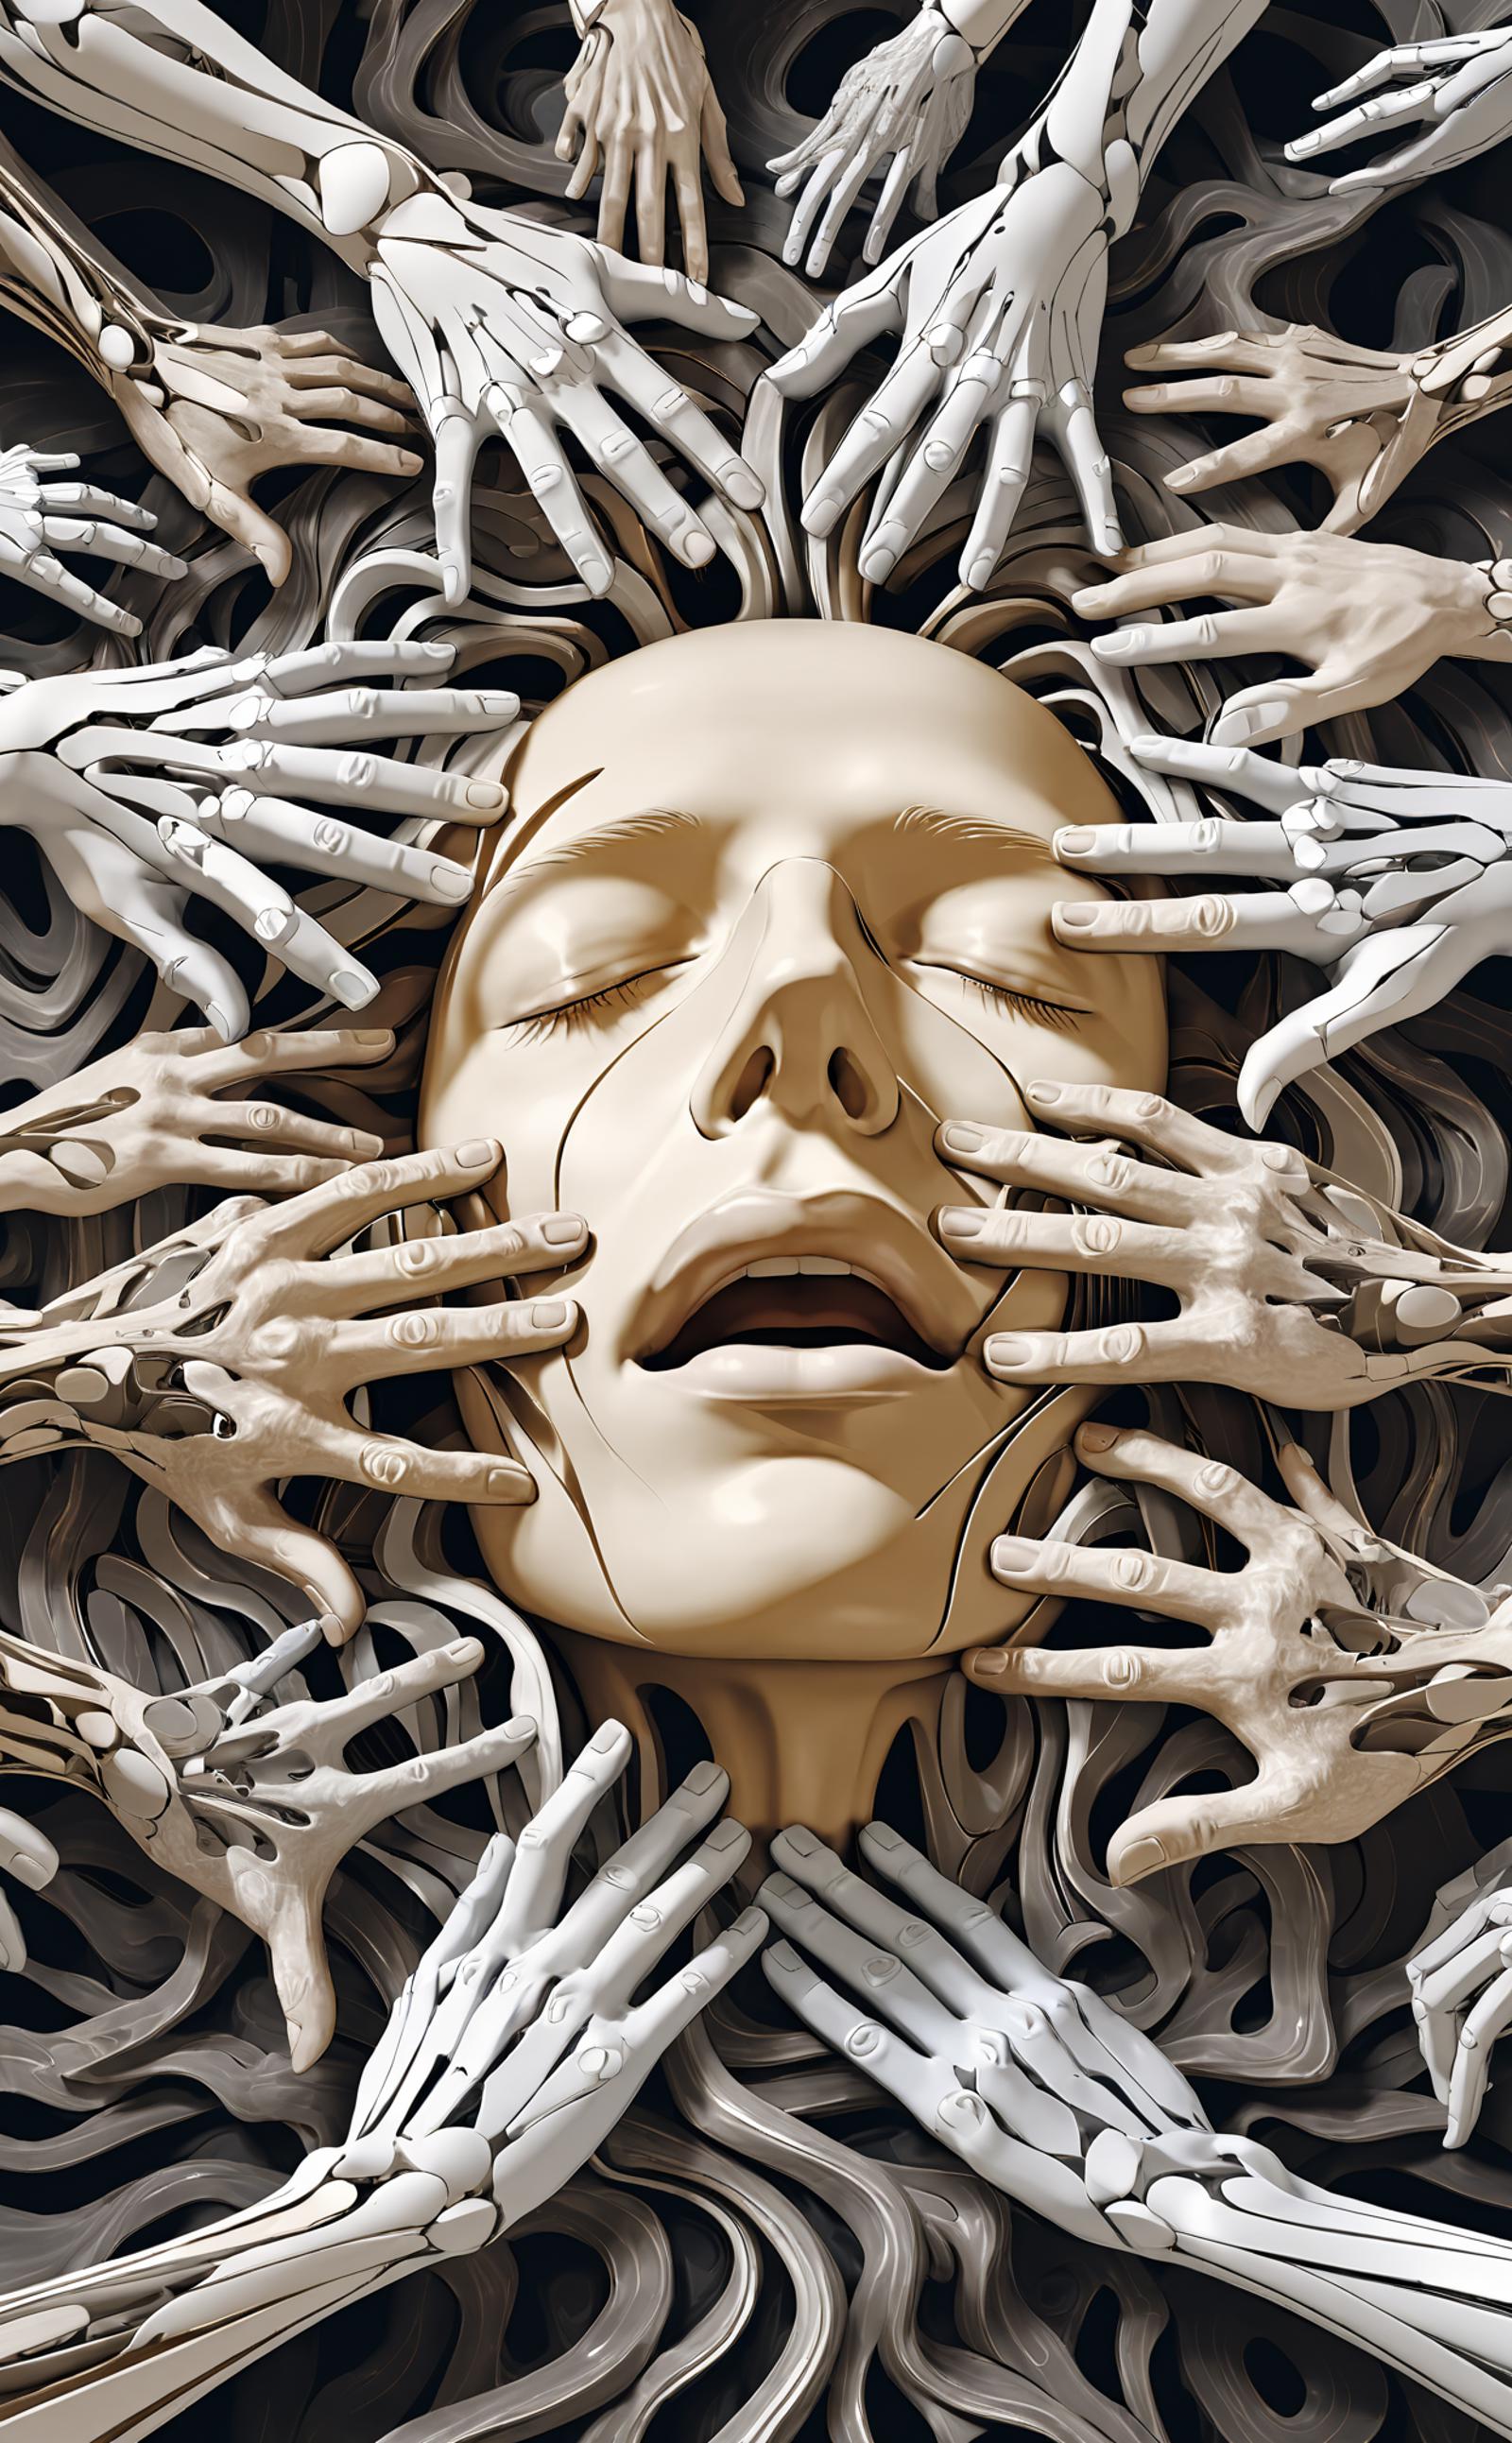 A 3D model of a face with hands placed over the mouth and eyes, giving an impression of being held down or restrained.